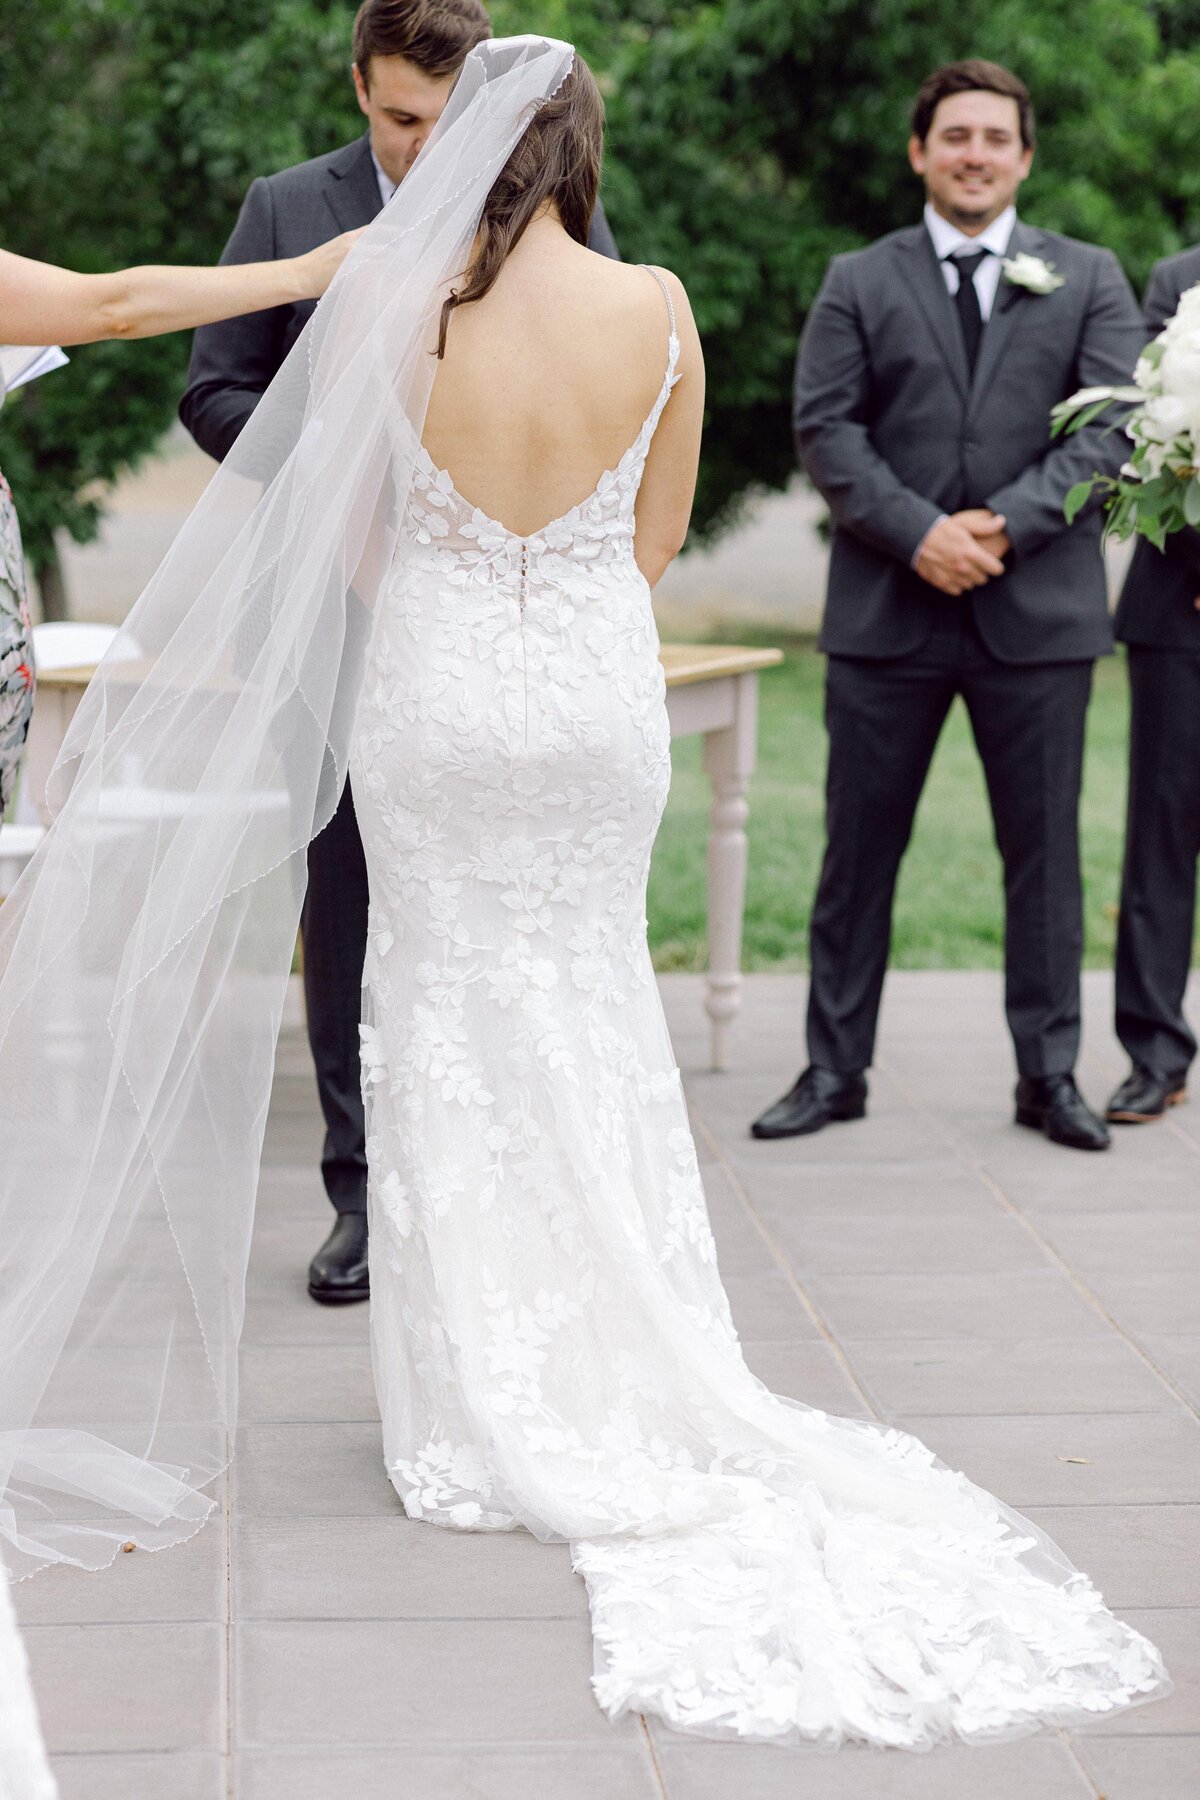 back view of brides gown and veil